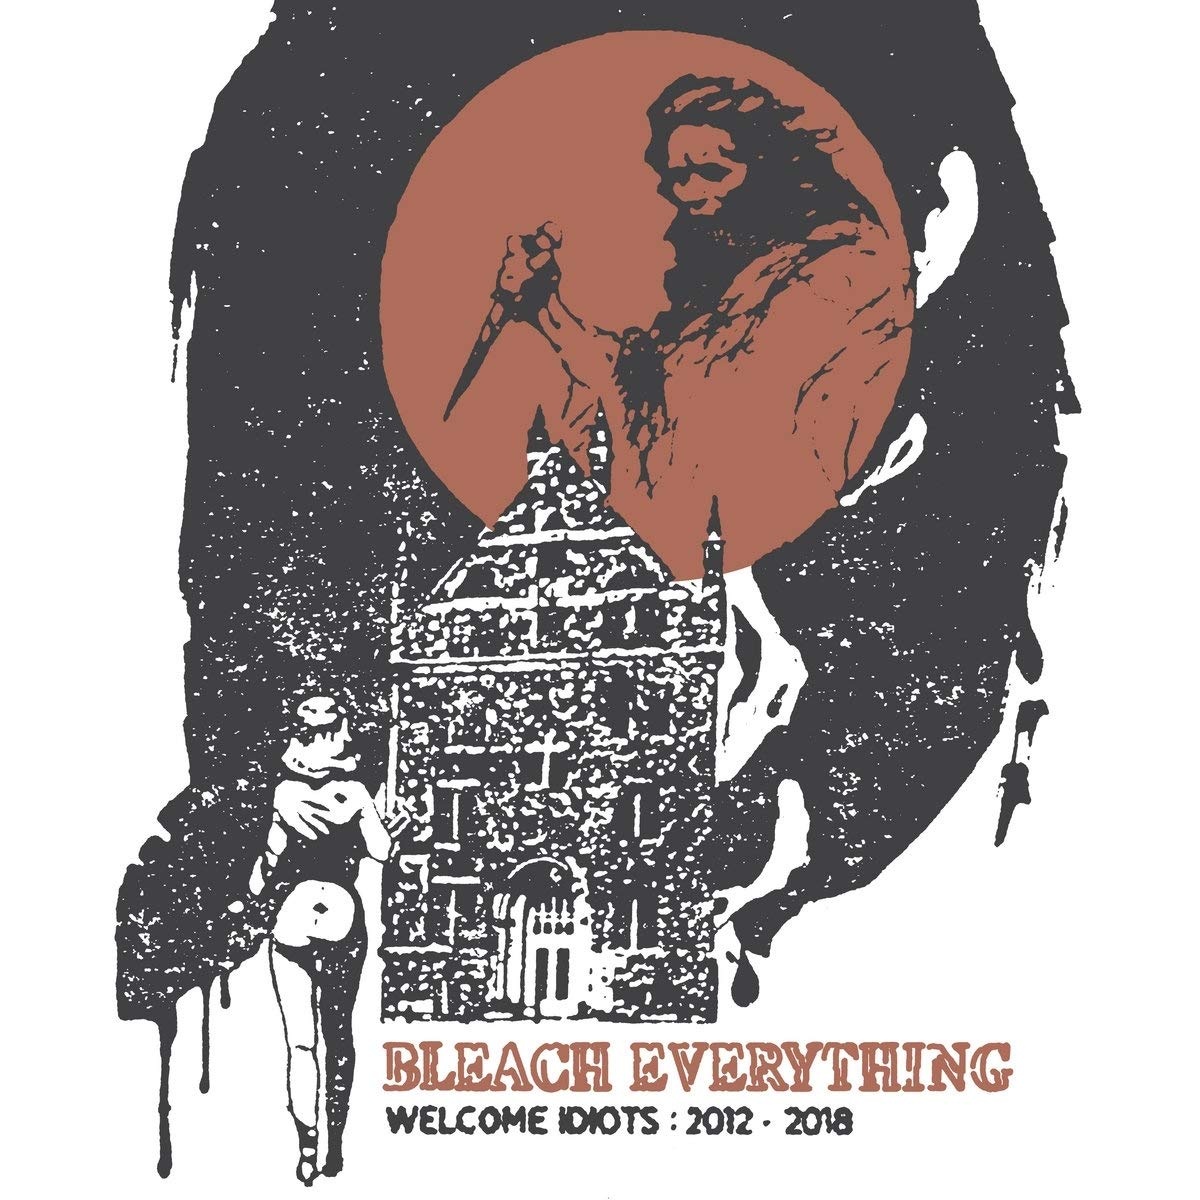 Thirteen of everything - Welcome, Humans 2005. Everything минус